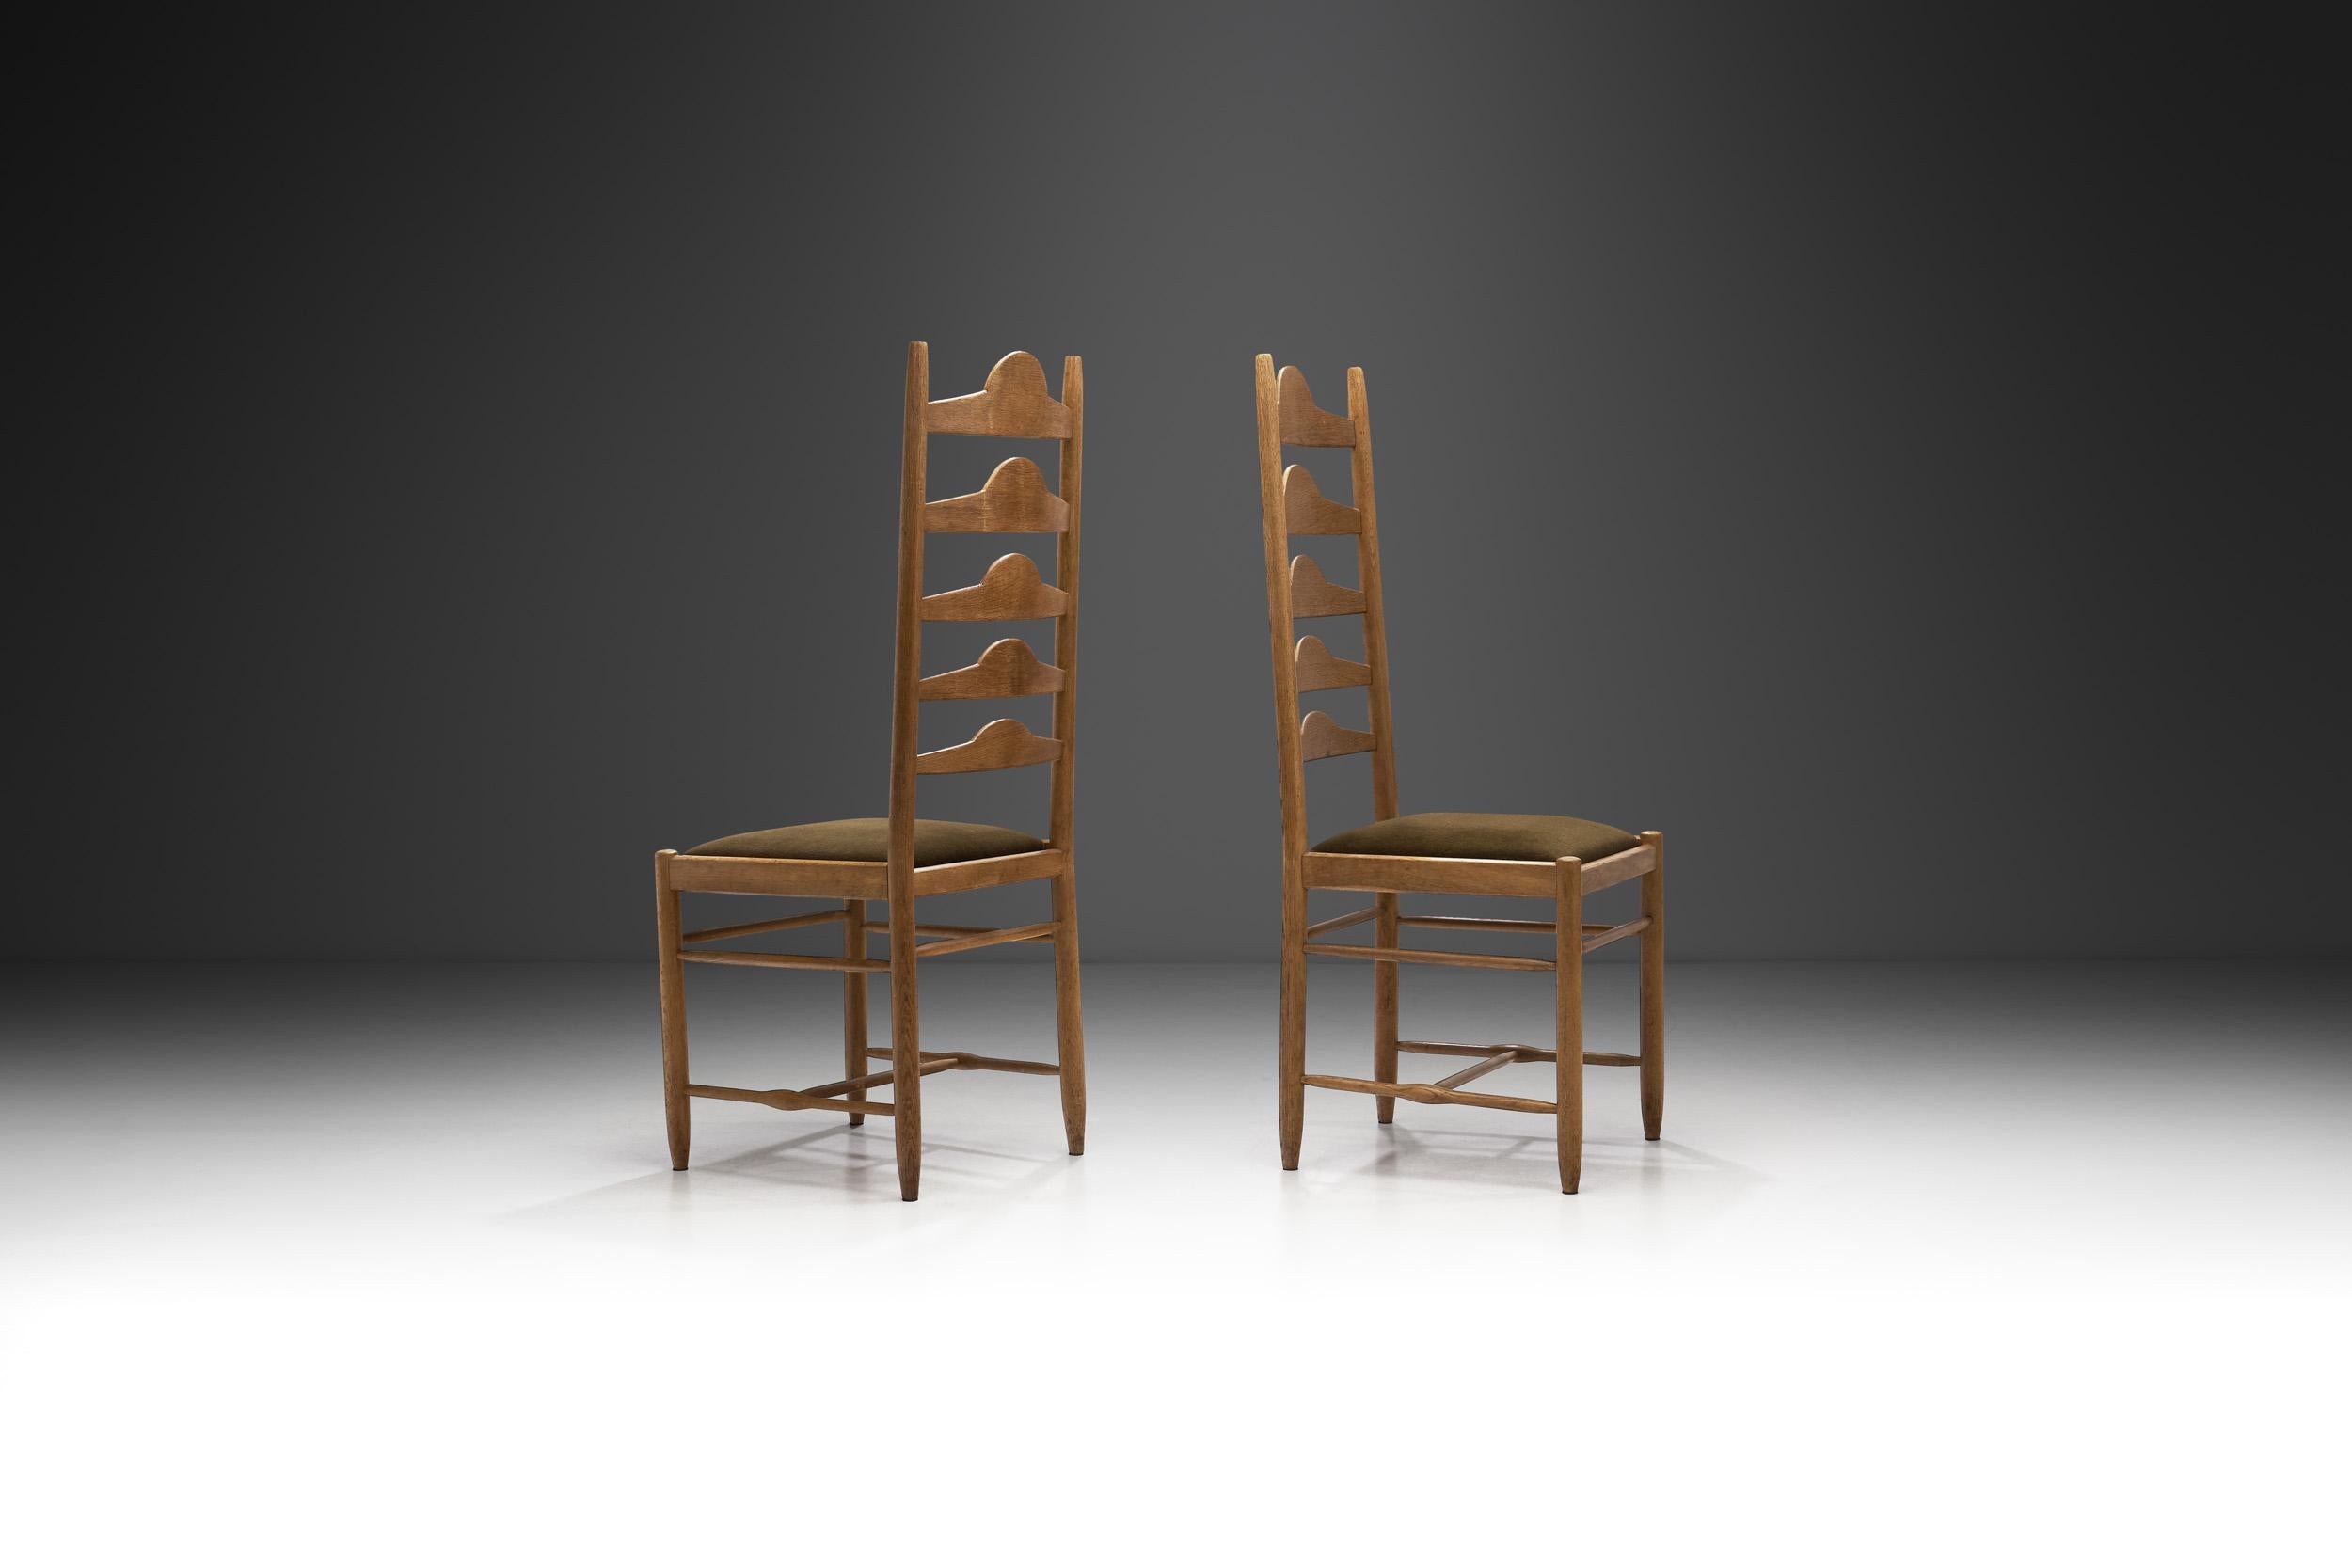 Sculptural Ladder-Back Chairs, Europe first half of the 20th century In Good Condition For Sale In Utrecht, NL